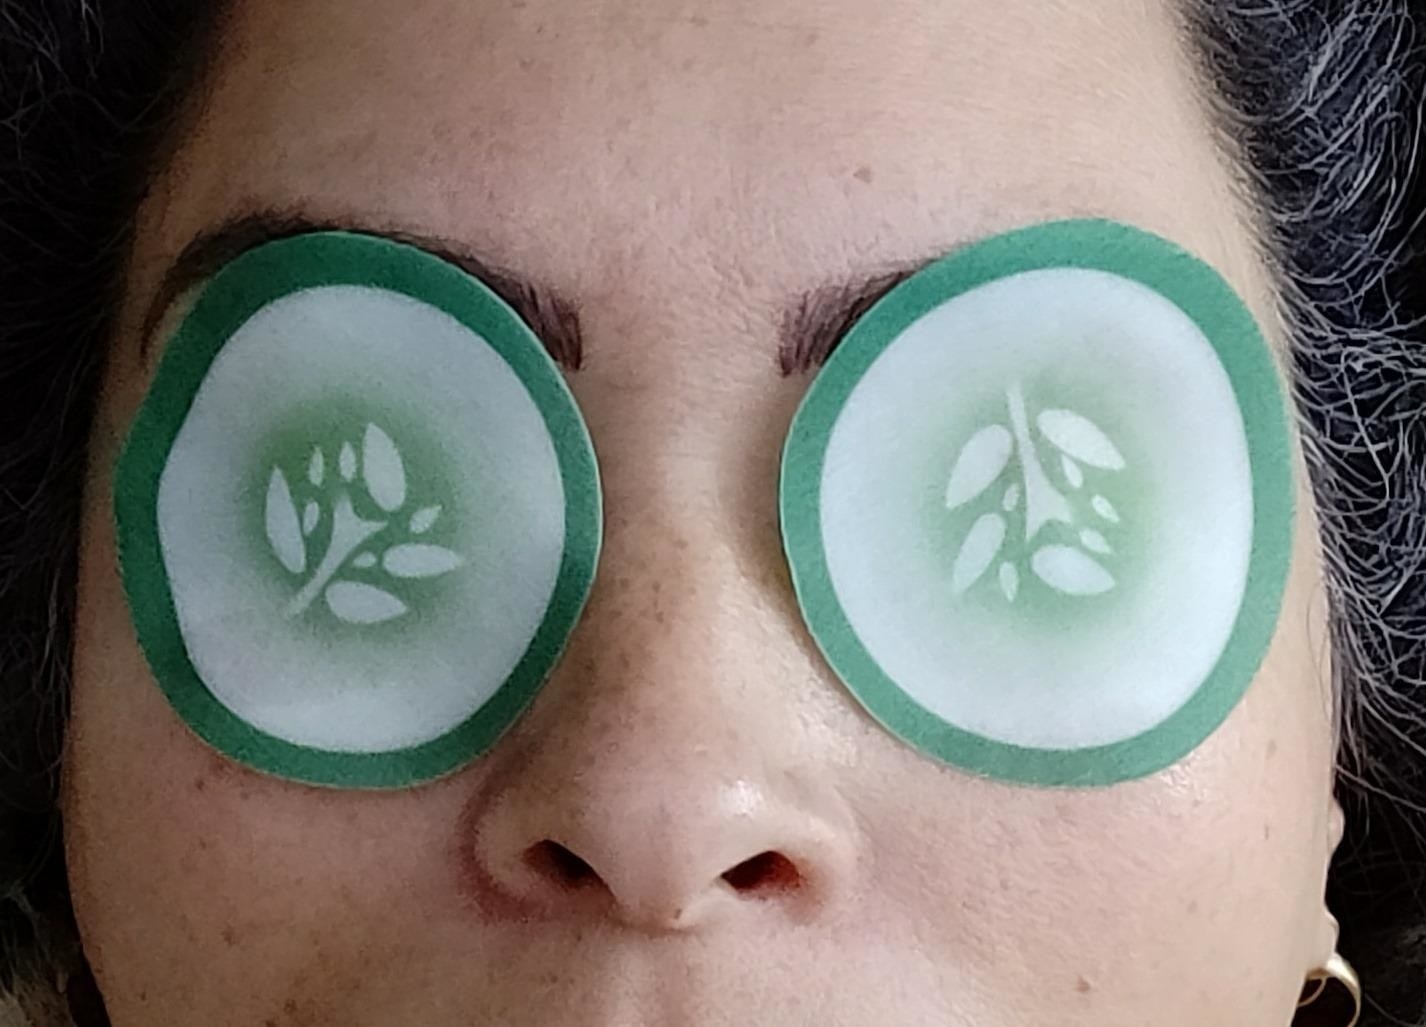 reviewer wearing the thin cucumber slice shaped eye patches